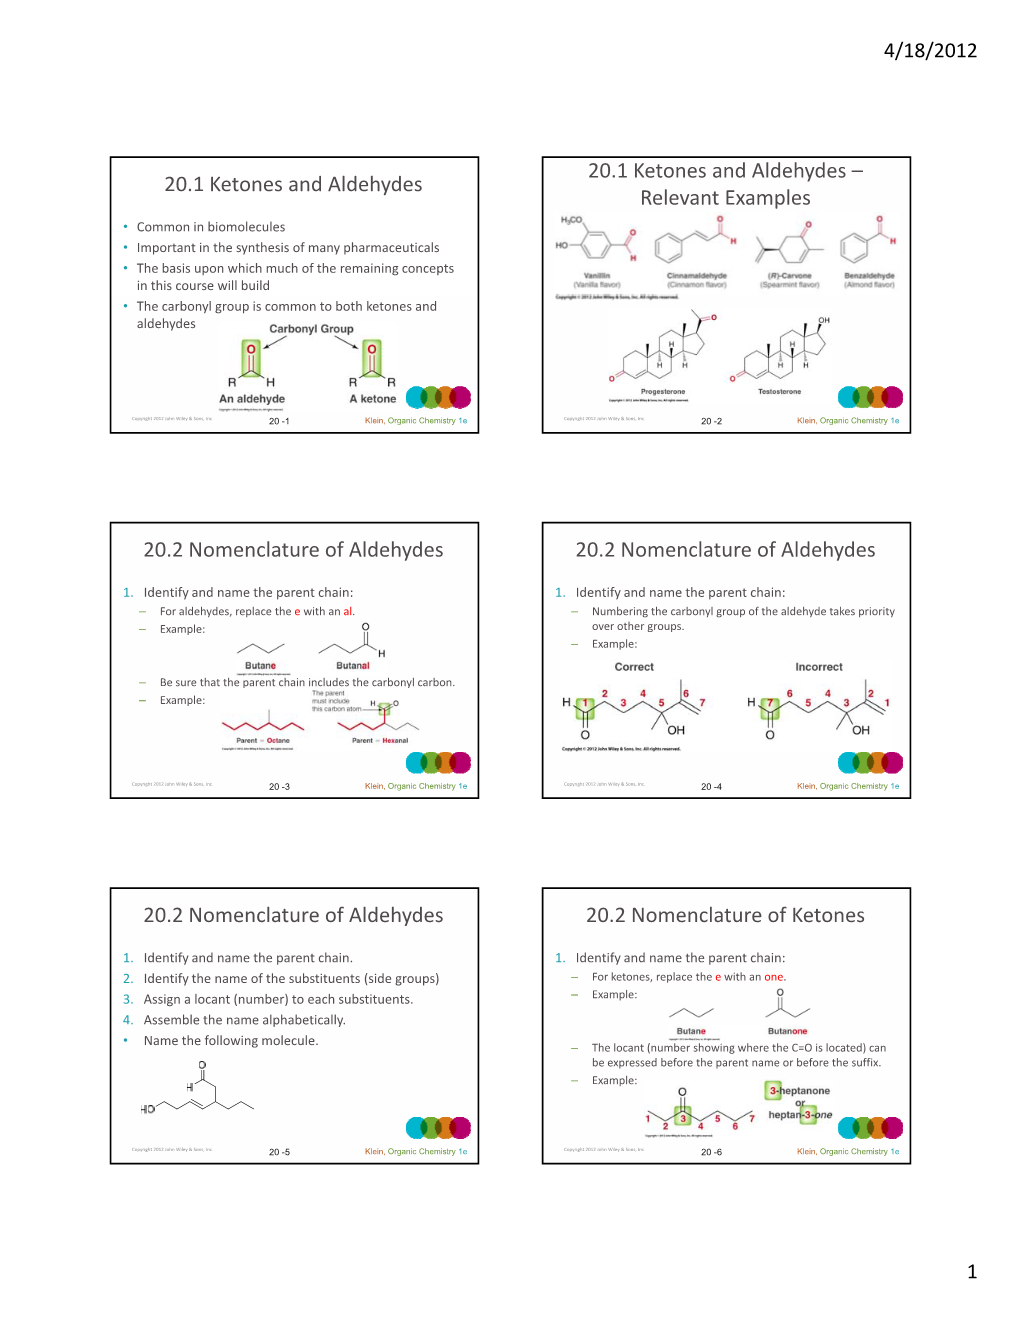 20.1 Ketones and Aldehydes – Relevant Examples